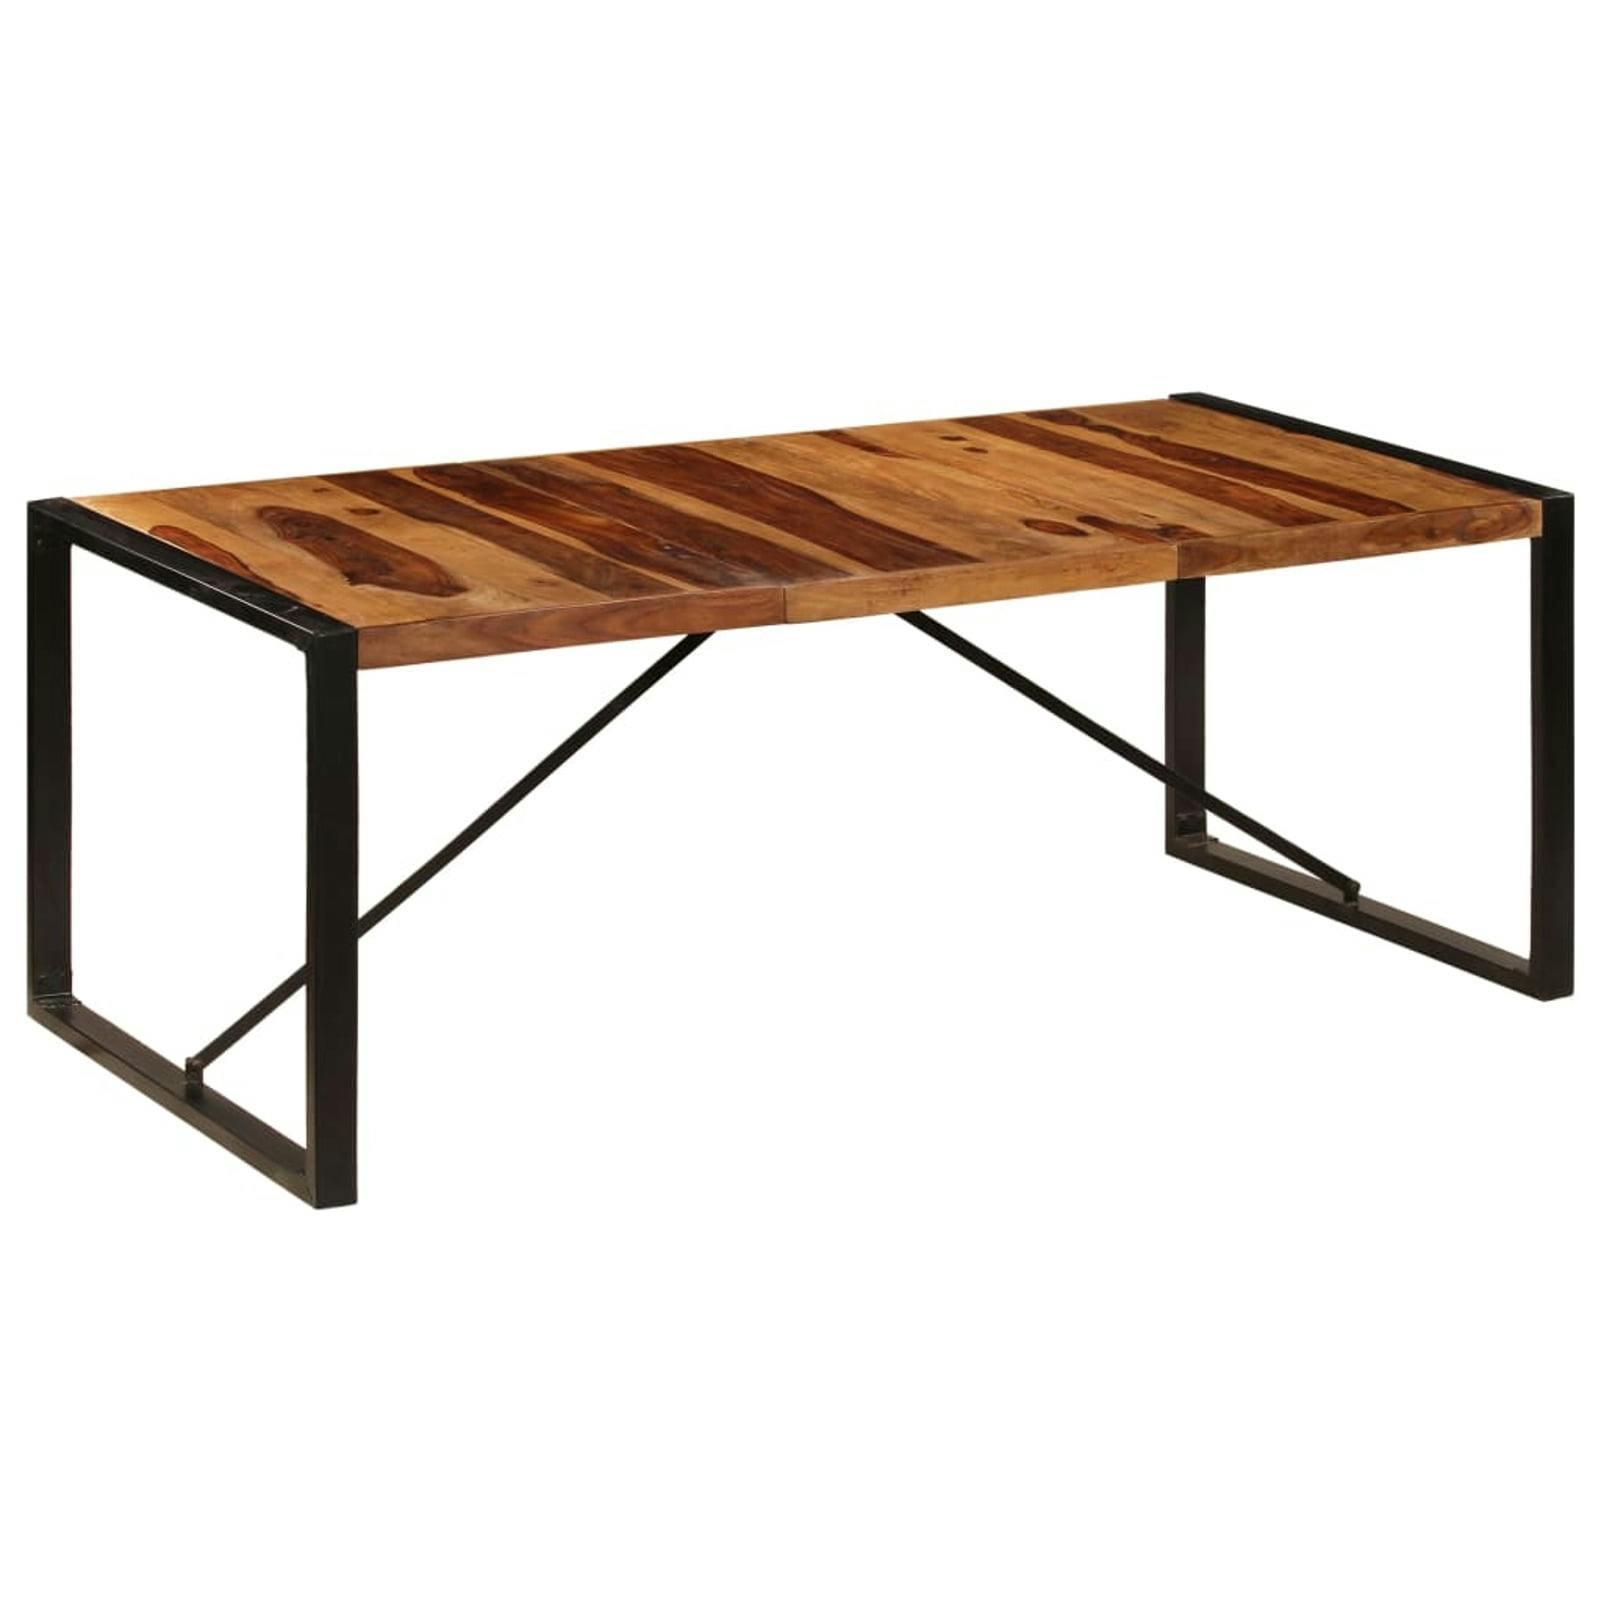 Retro Sheesham Wood Dining Table 55"x28" with Steel Legs